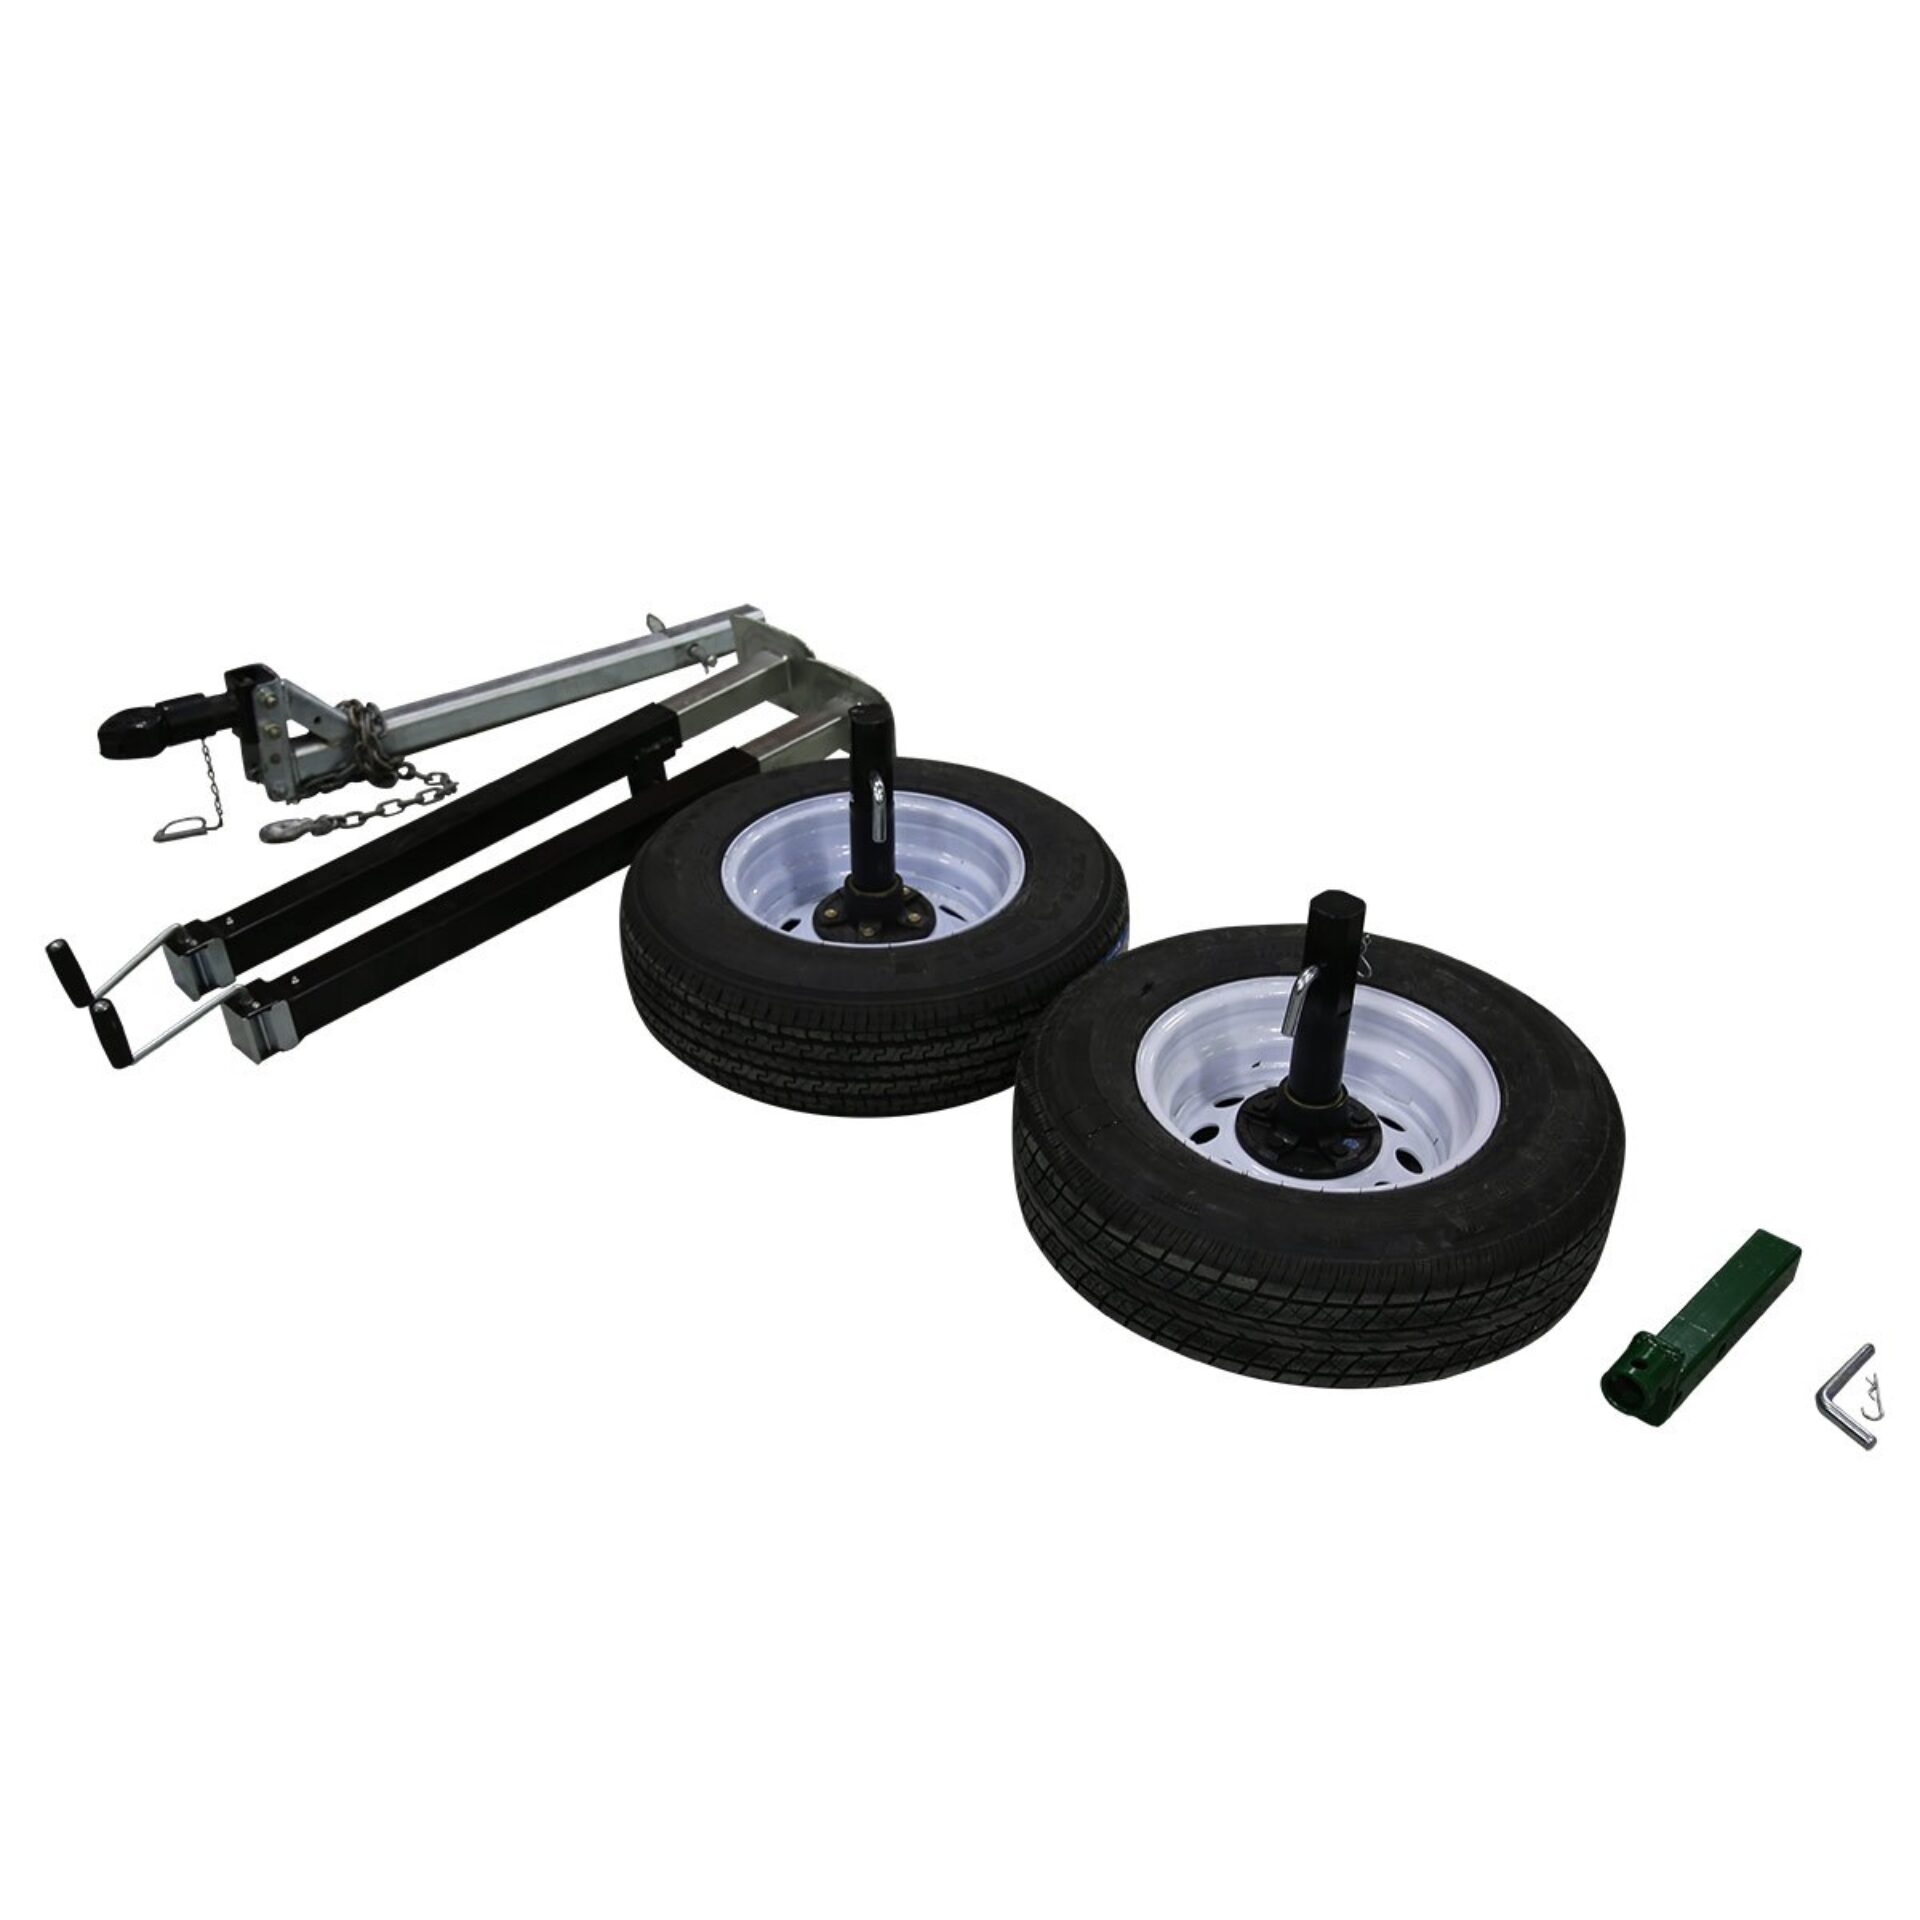 Portable cattle chute wheel kit components